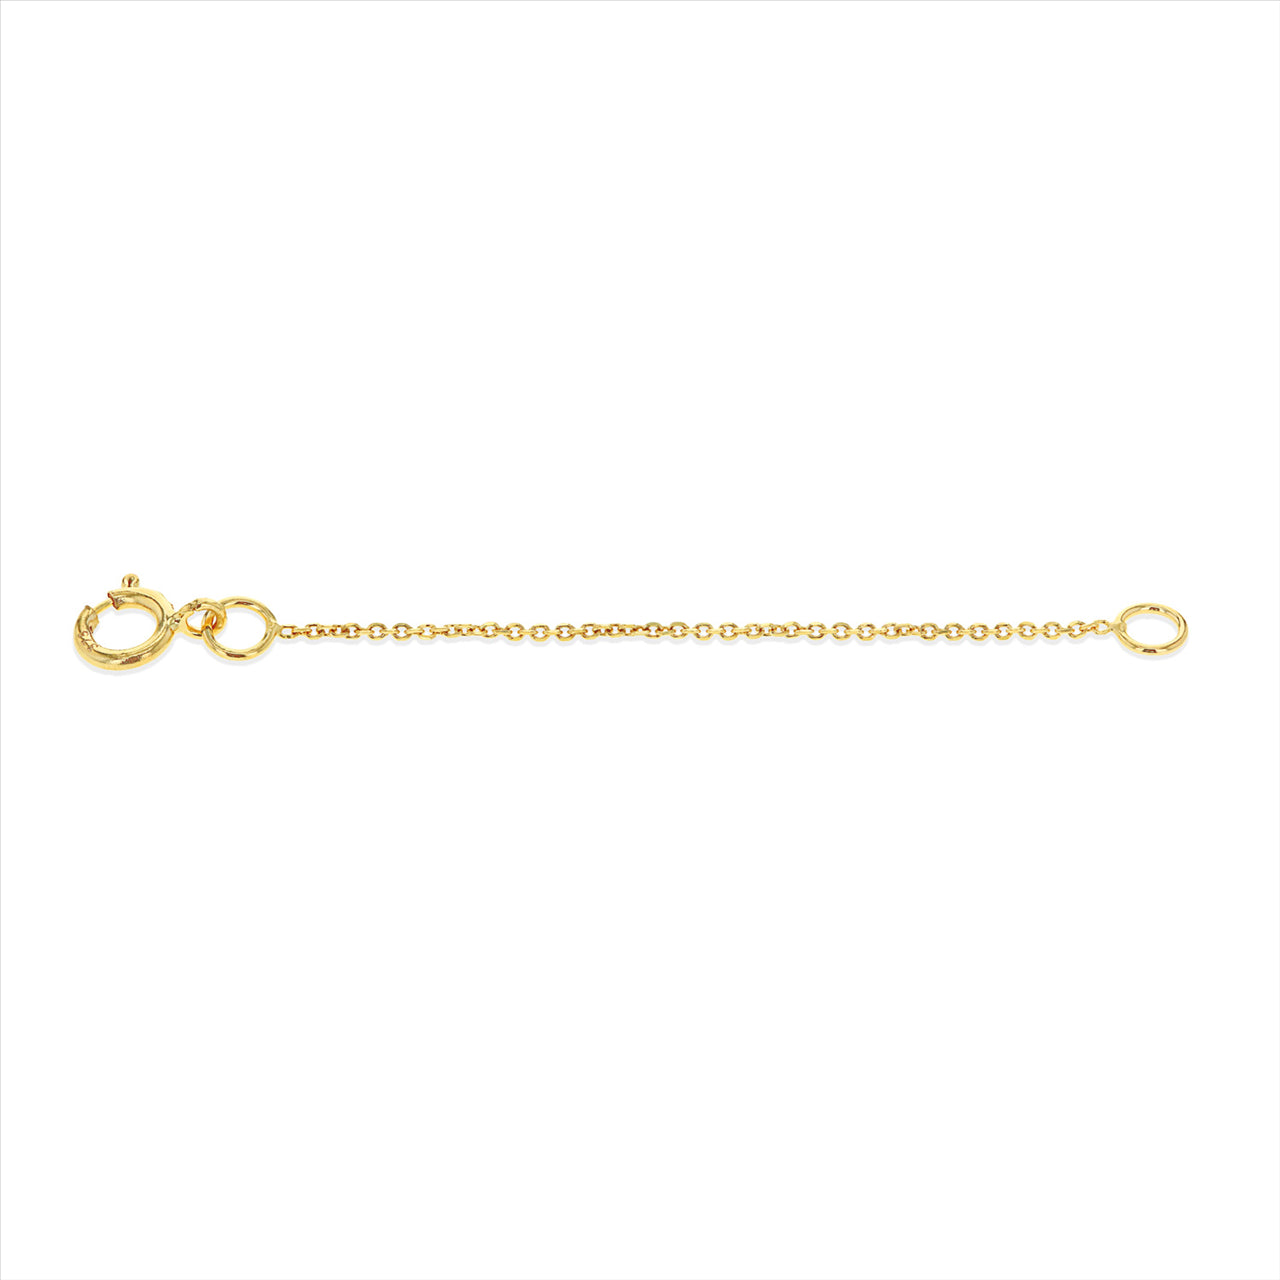 9ct yellow Gold 5cm chain extension.